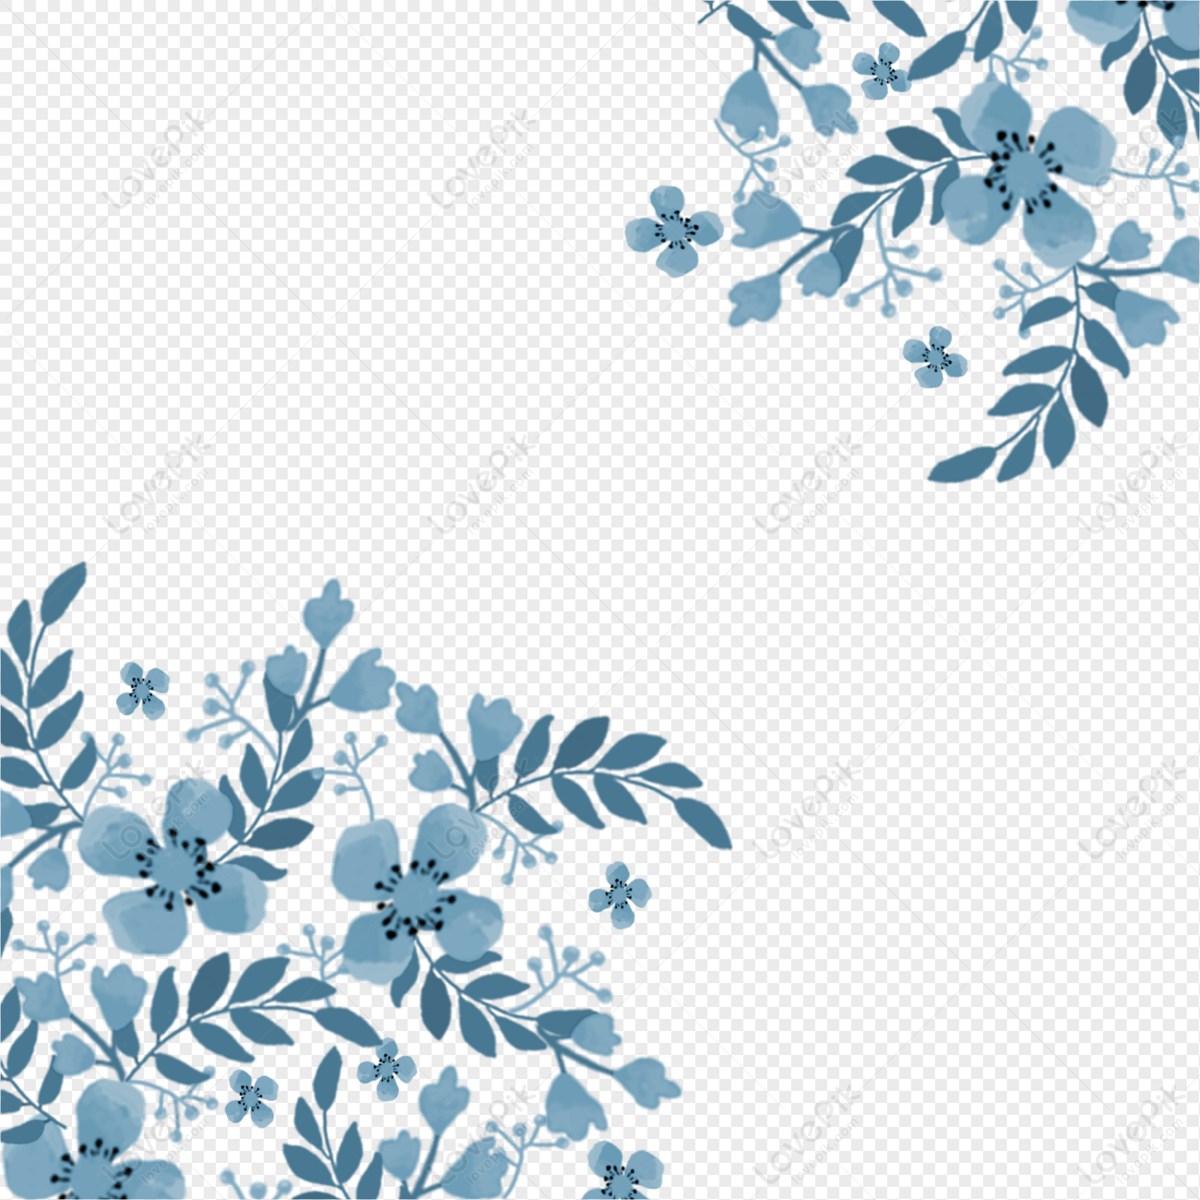 Blue Flowers Border PNG Images With Transparent Background | Free ...